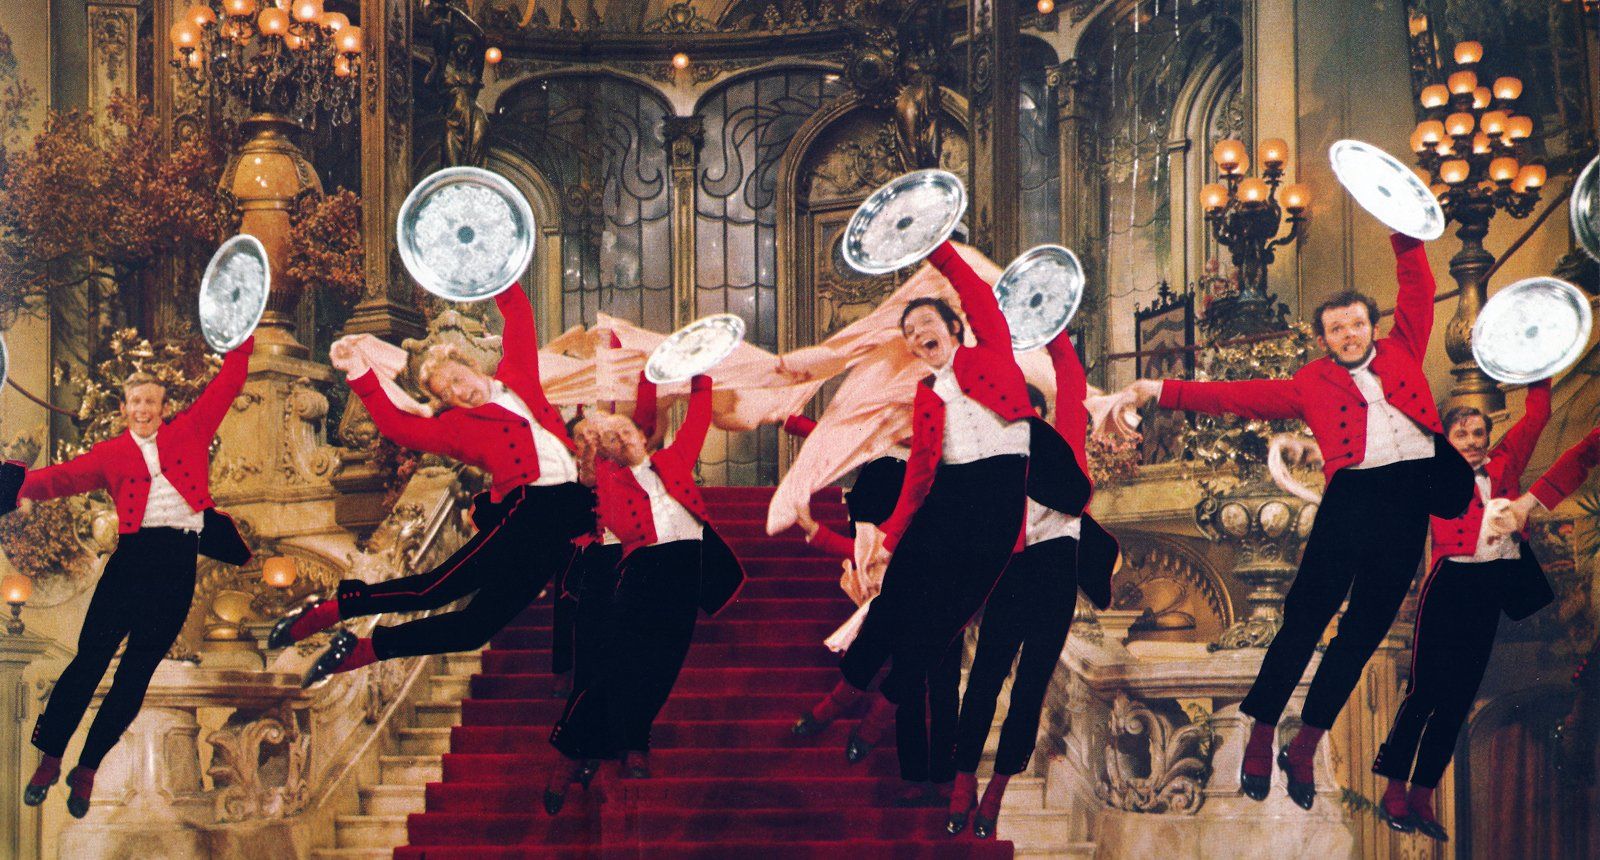 Male dancers perform the Waiters Gallop